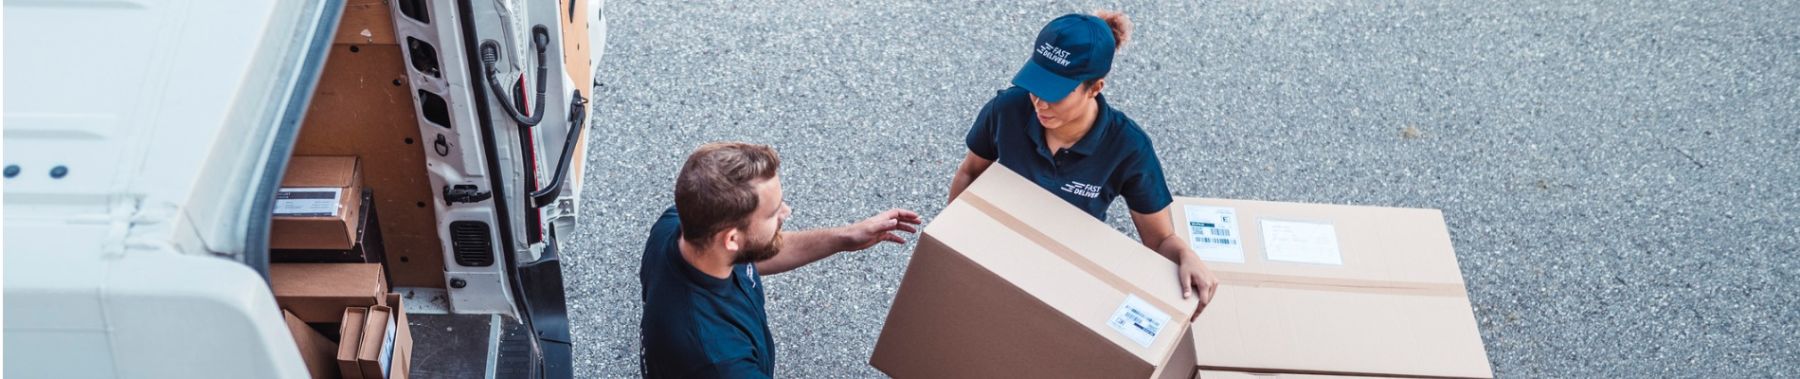 Shine Lawyers | Safety Tips for Delivery Drivers | Shine Lawyers